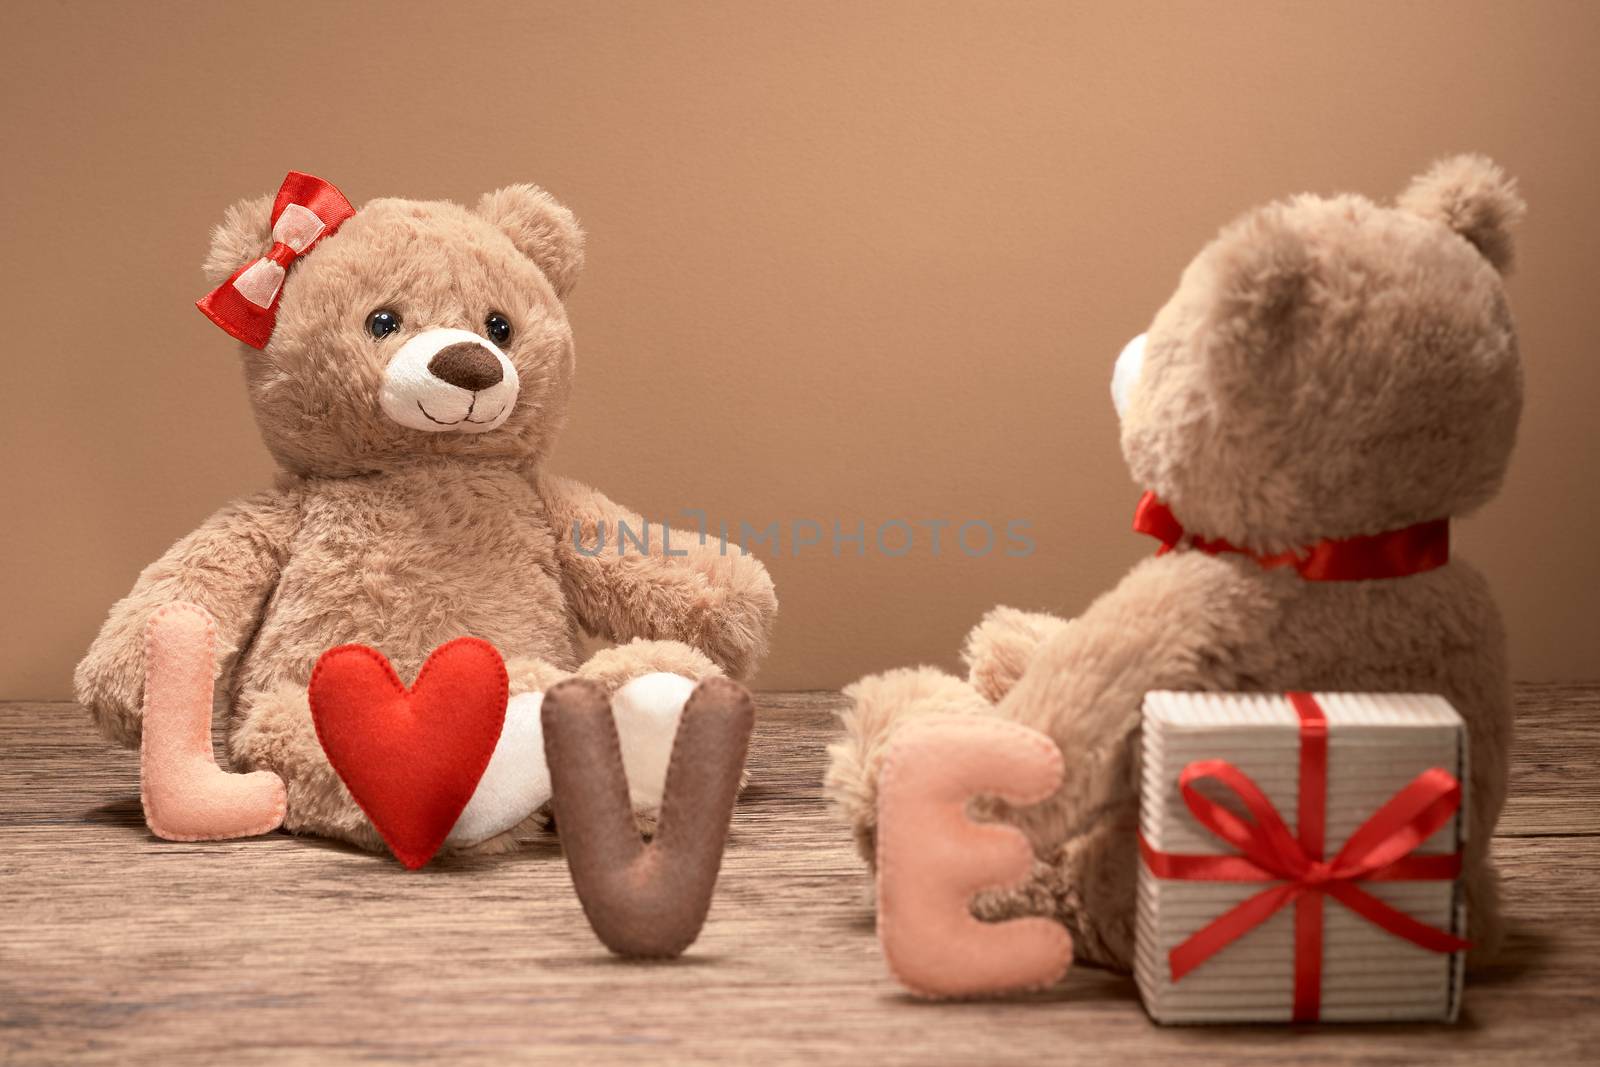 Valentines Day.Word Love heart.Couple Teddy Bears  by 918